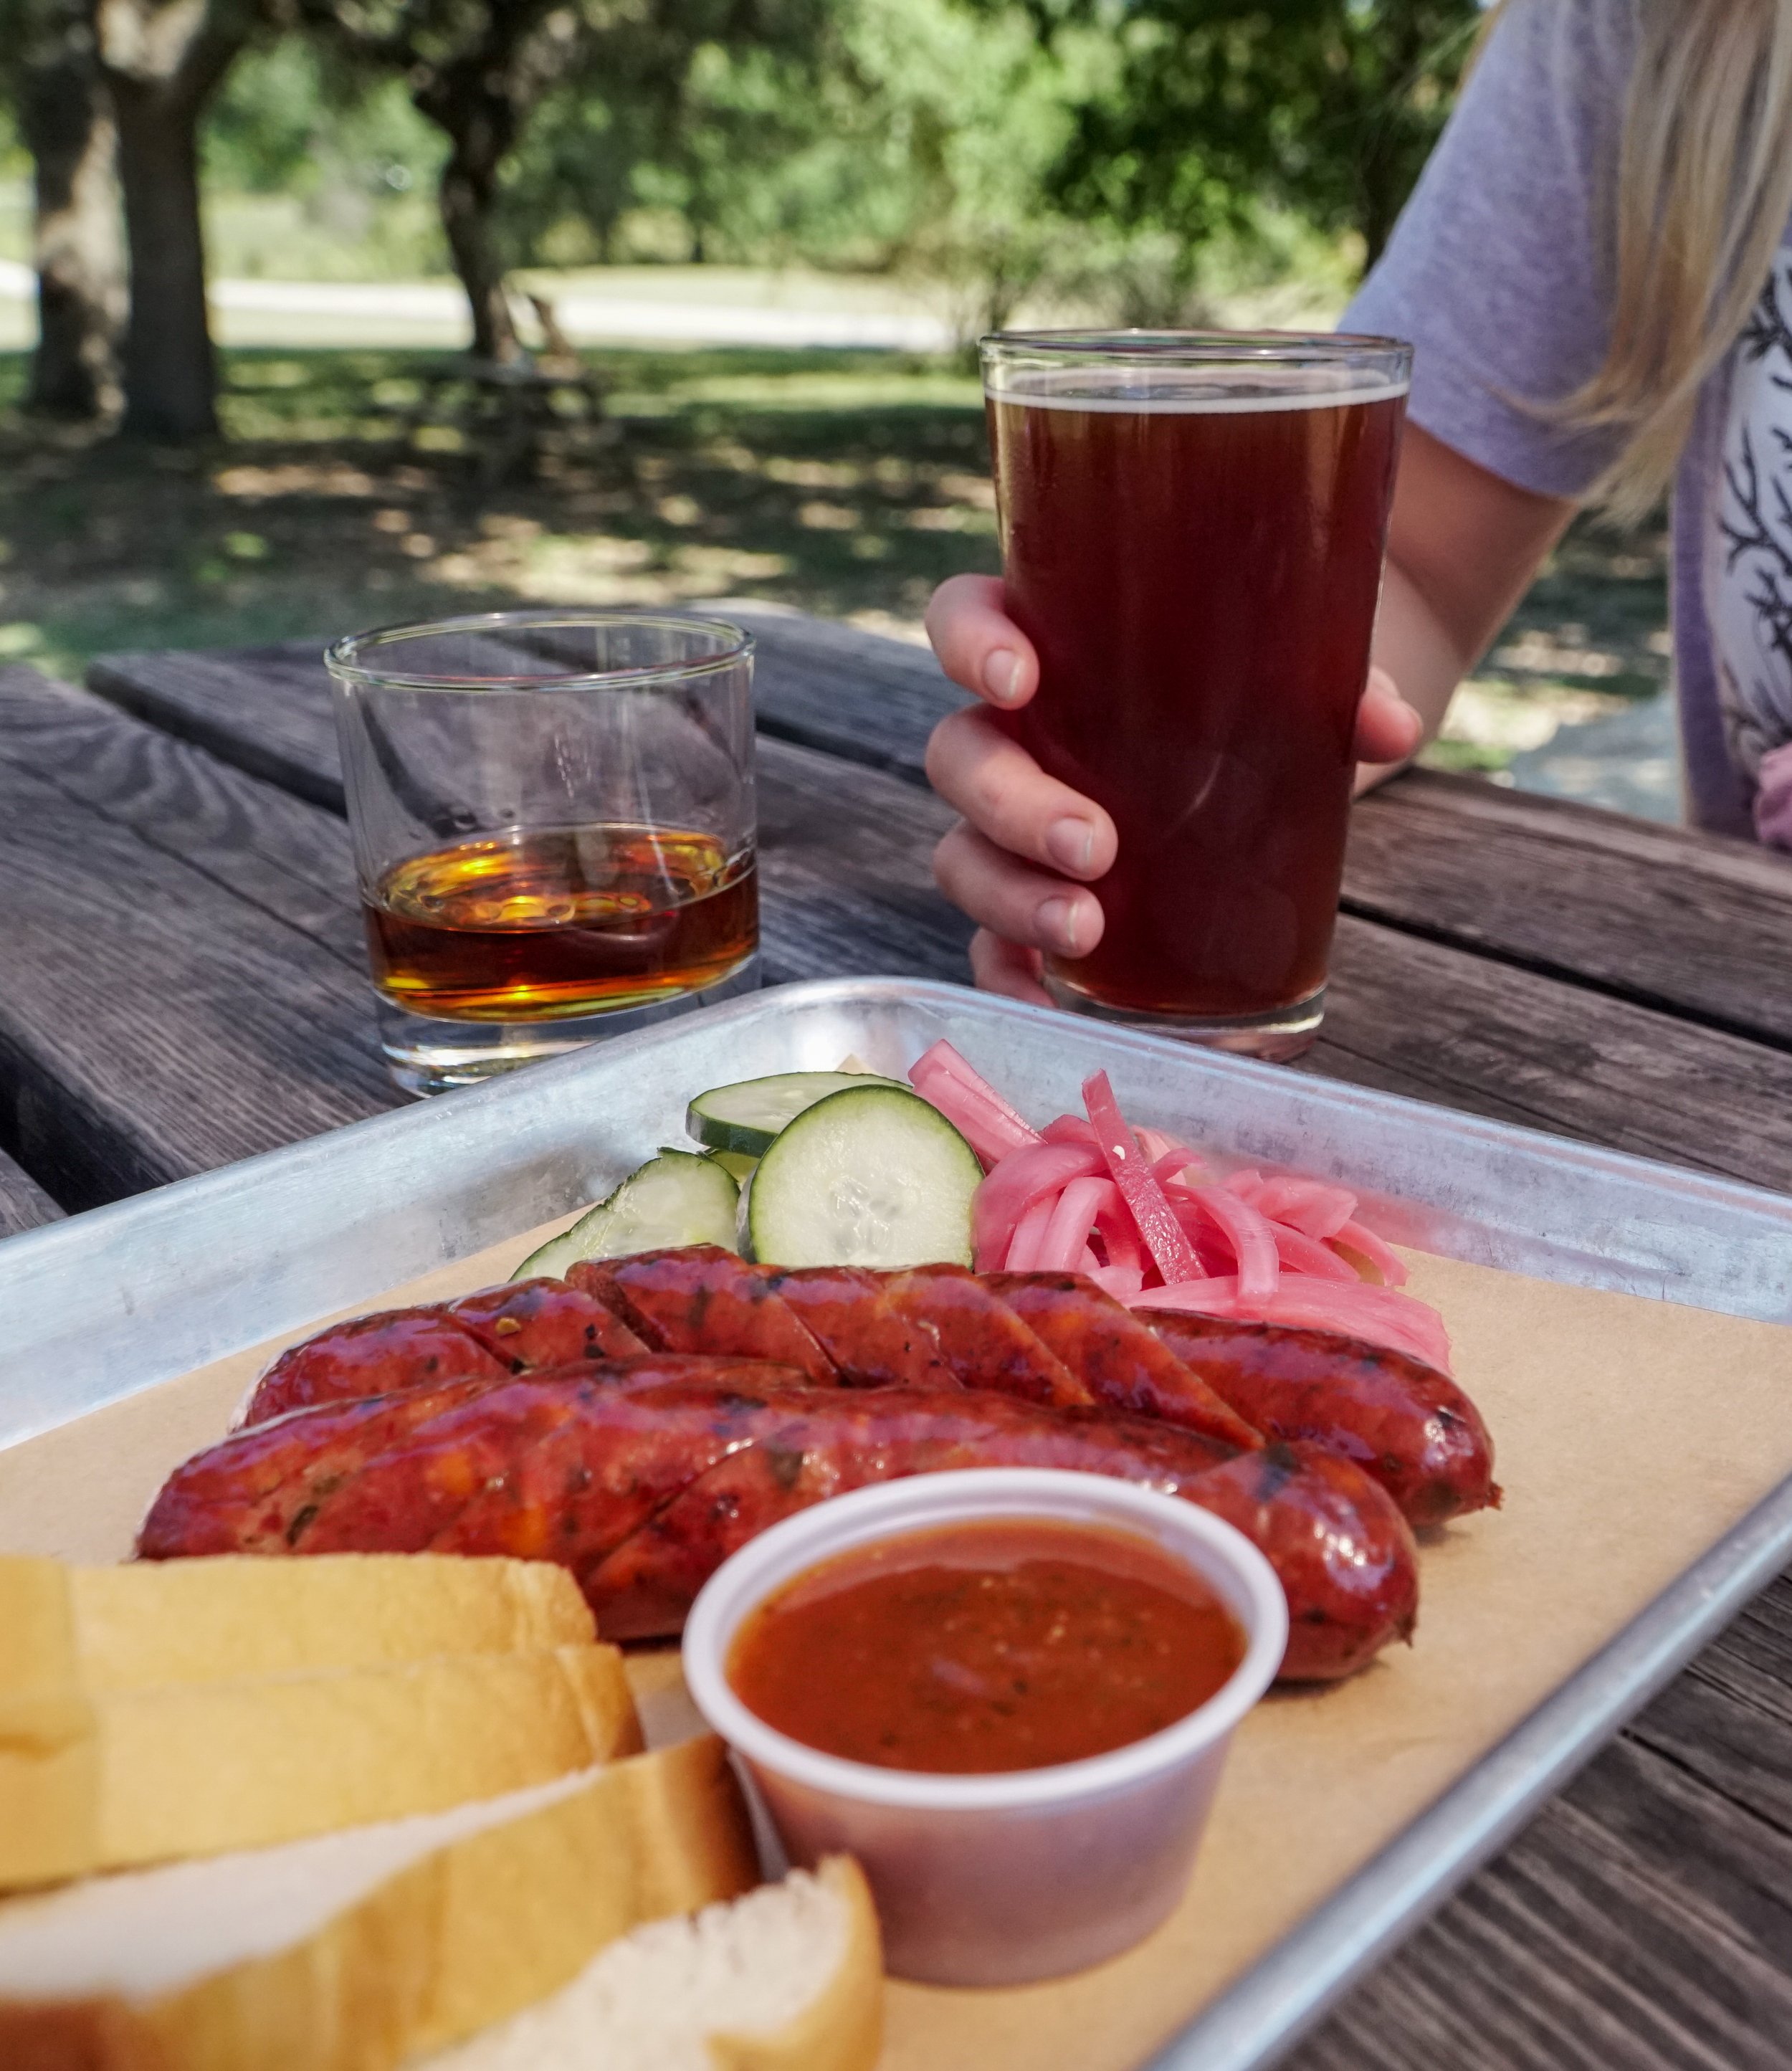 plate of sausage with side of bread and barbecue sauce